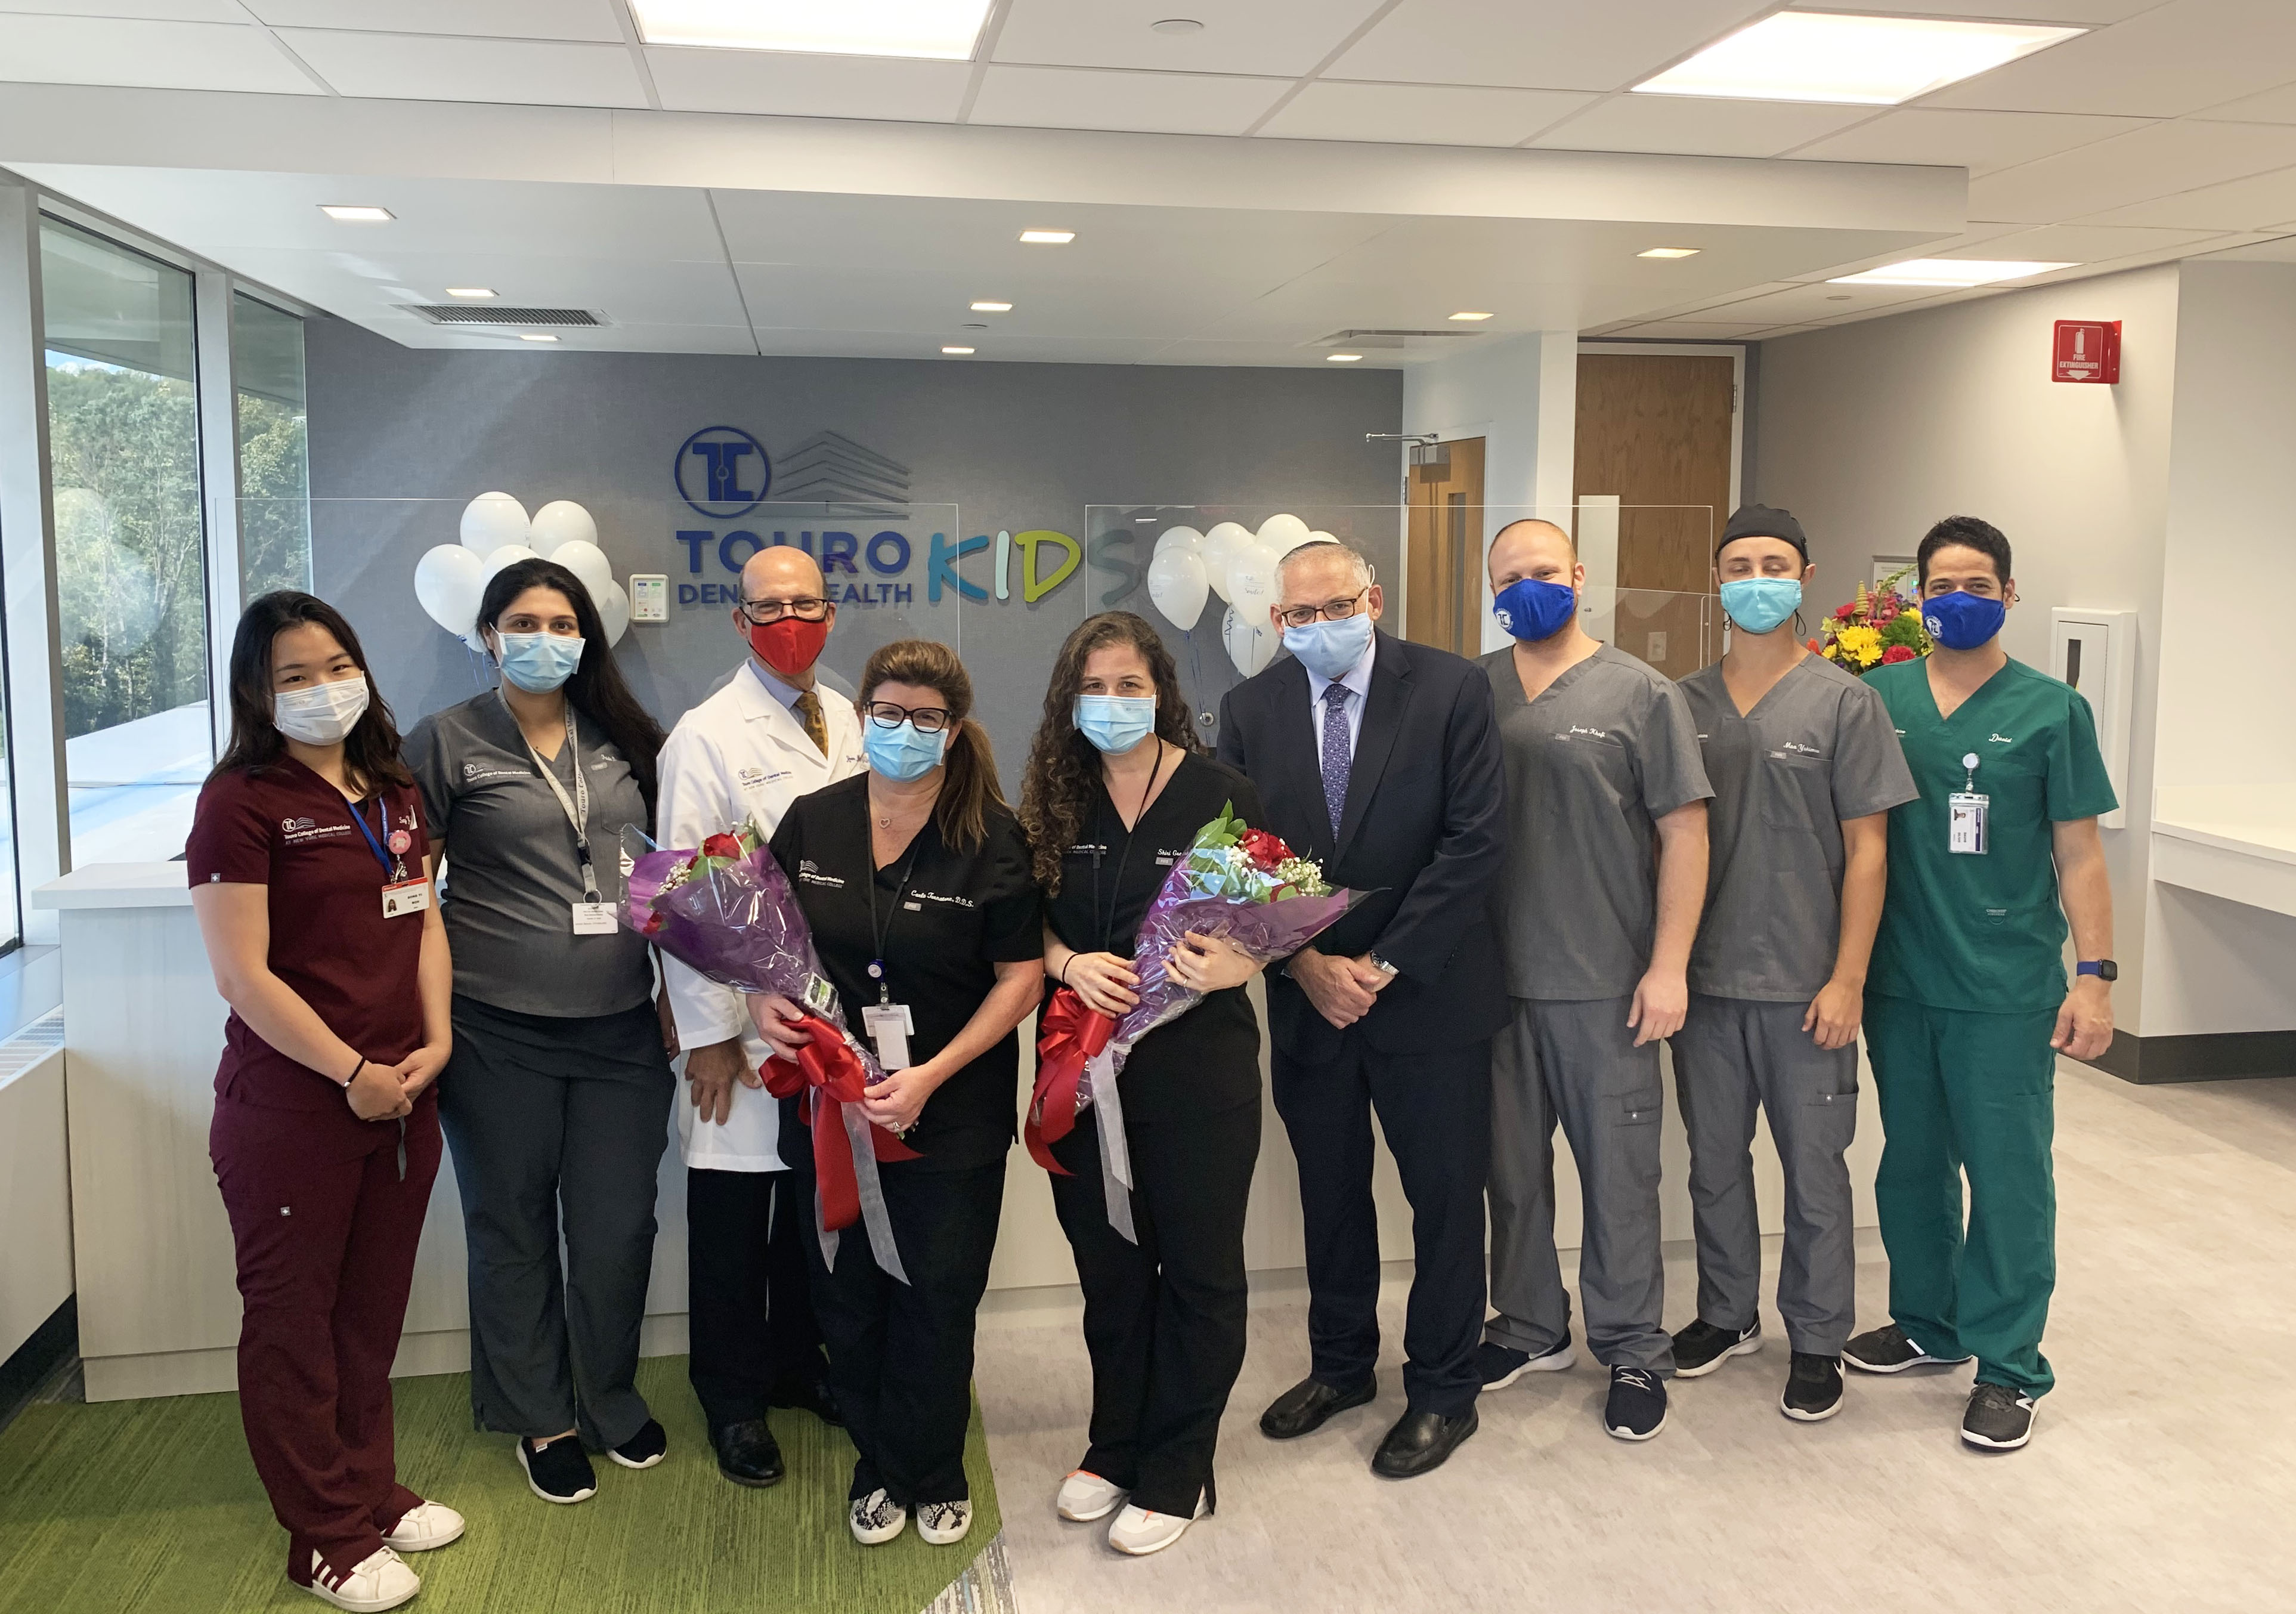 TCDM celebrated the official opening of its new Pediatric Practice - Touro Dental Health Kids